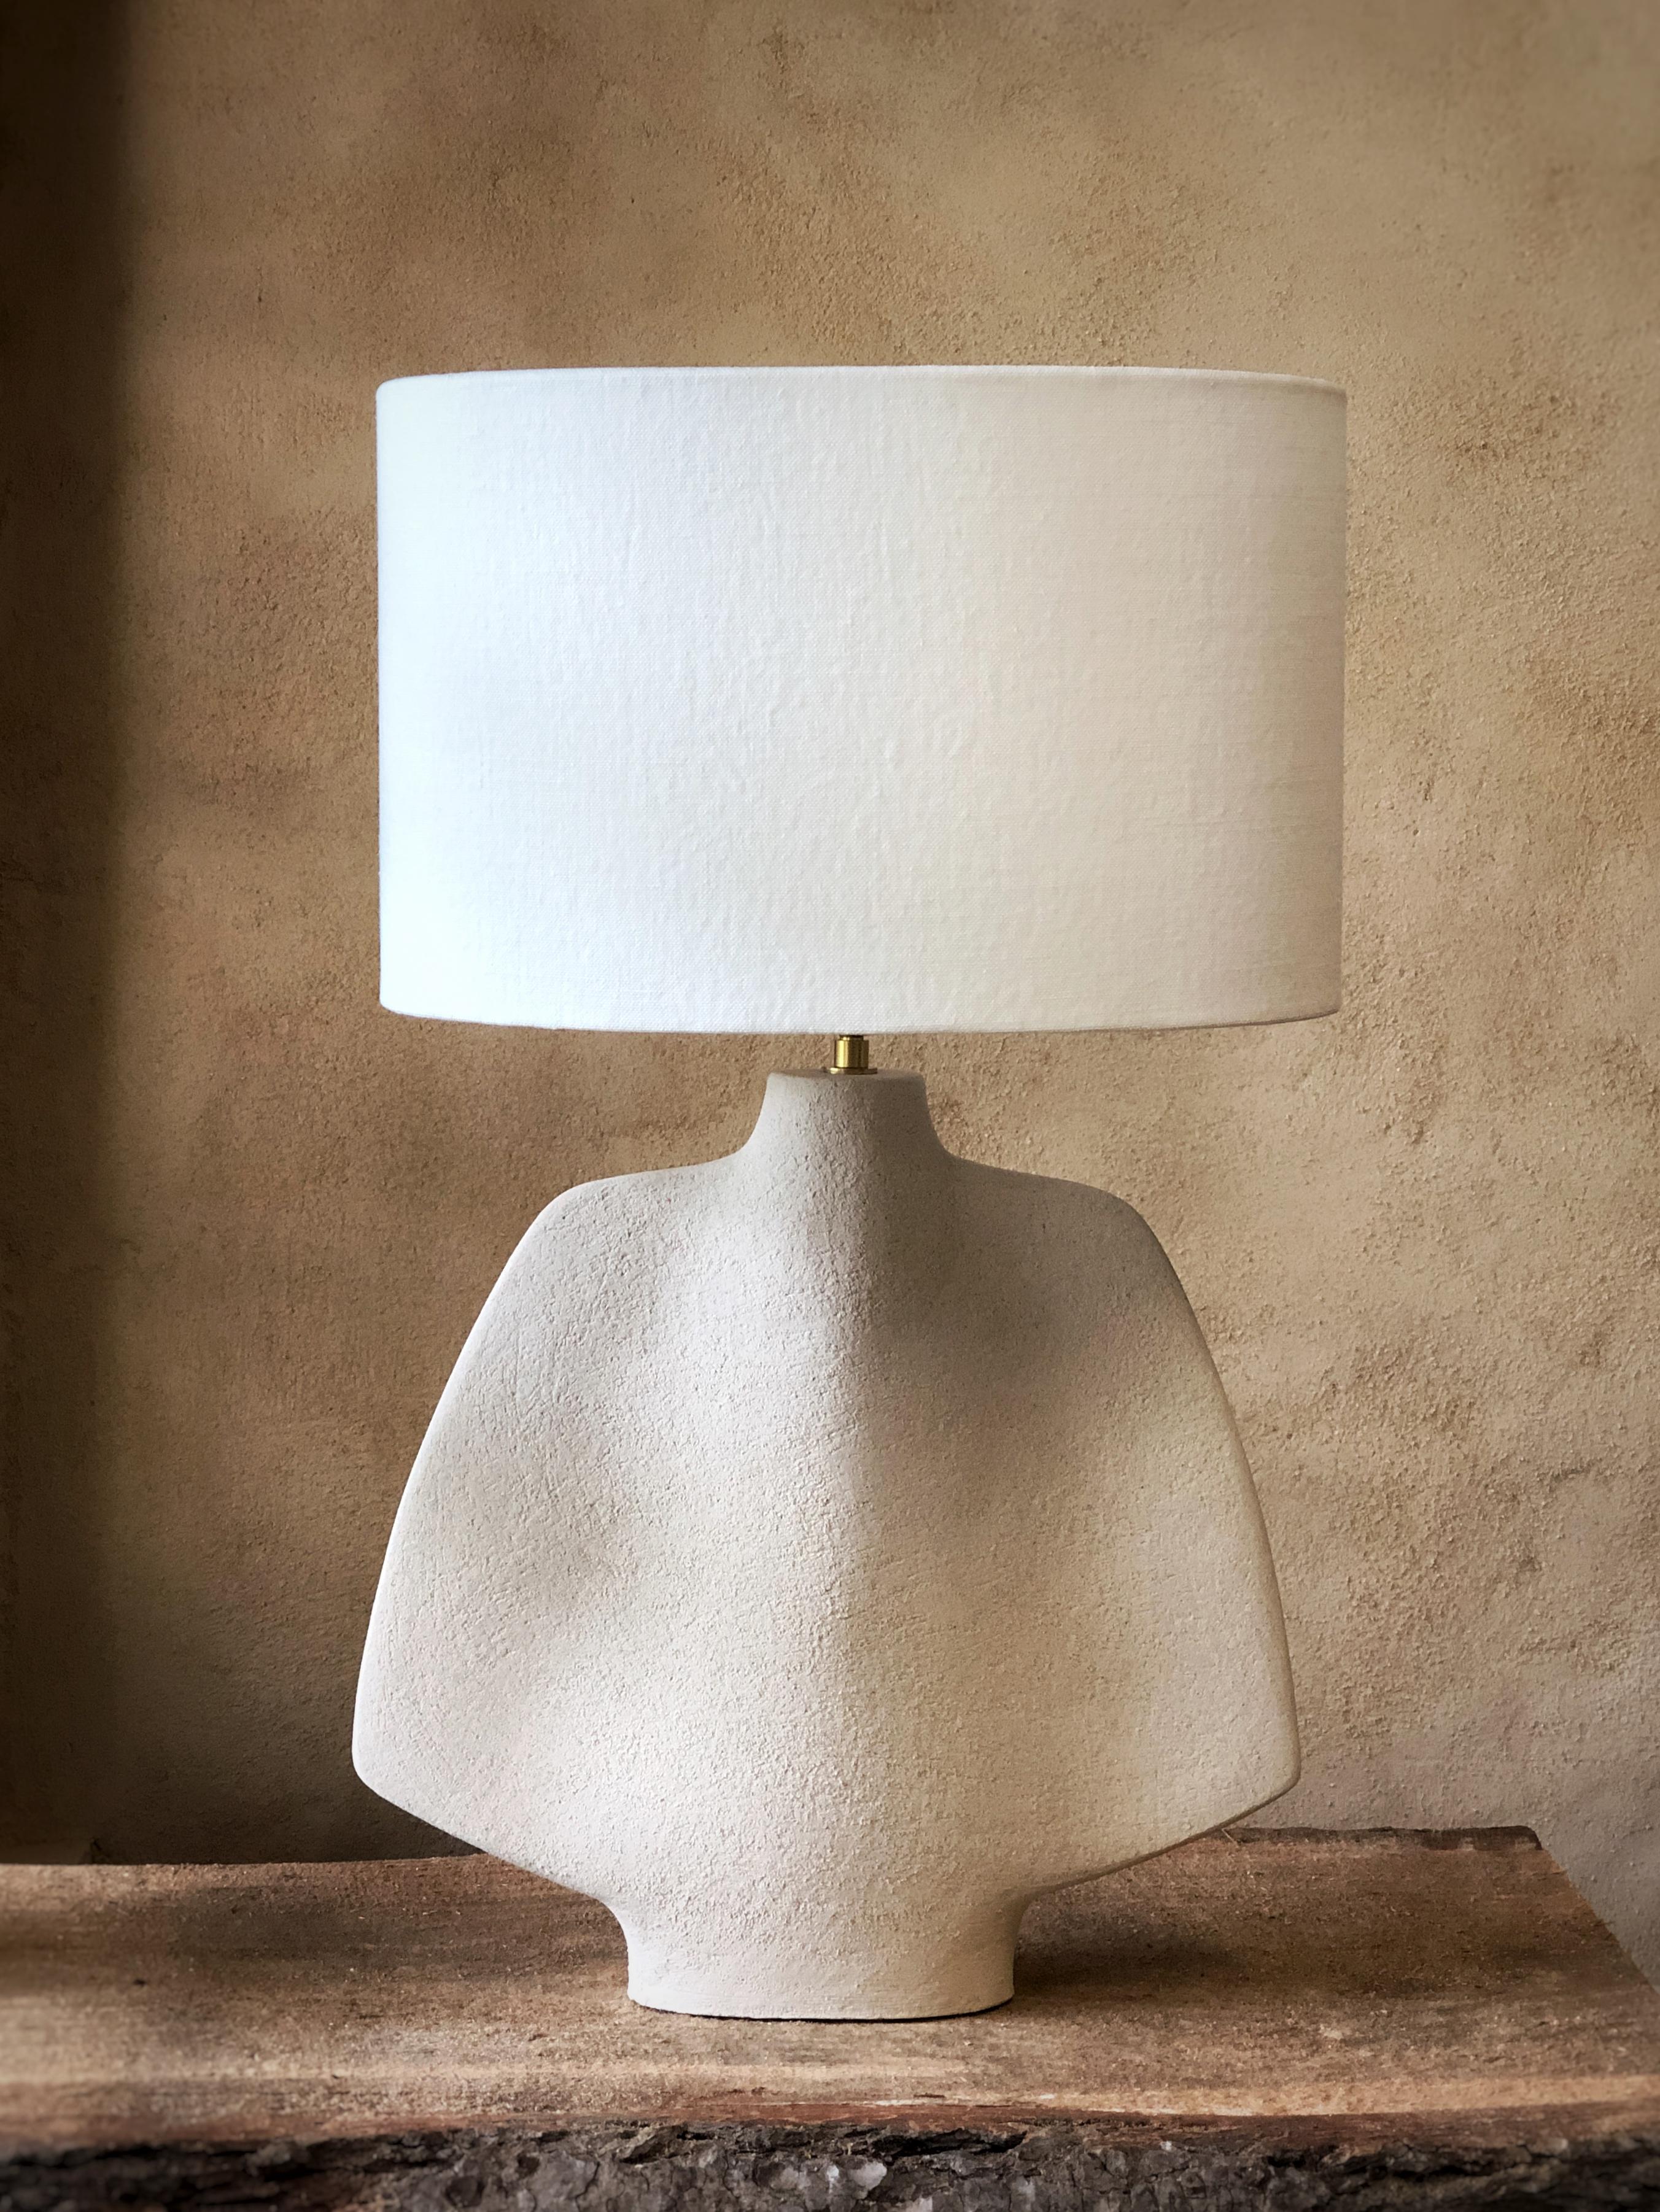 L04 Lamp by Sophie Vaidie
One Of A Kind.
Dimensions: D 24 x W 35 x H 60 cm. 
Materials: Beige brutal stoneware with fine chamotte and white linen fabric.

All our lamps can be wired according to each country. If sold to the USA it will be wired for